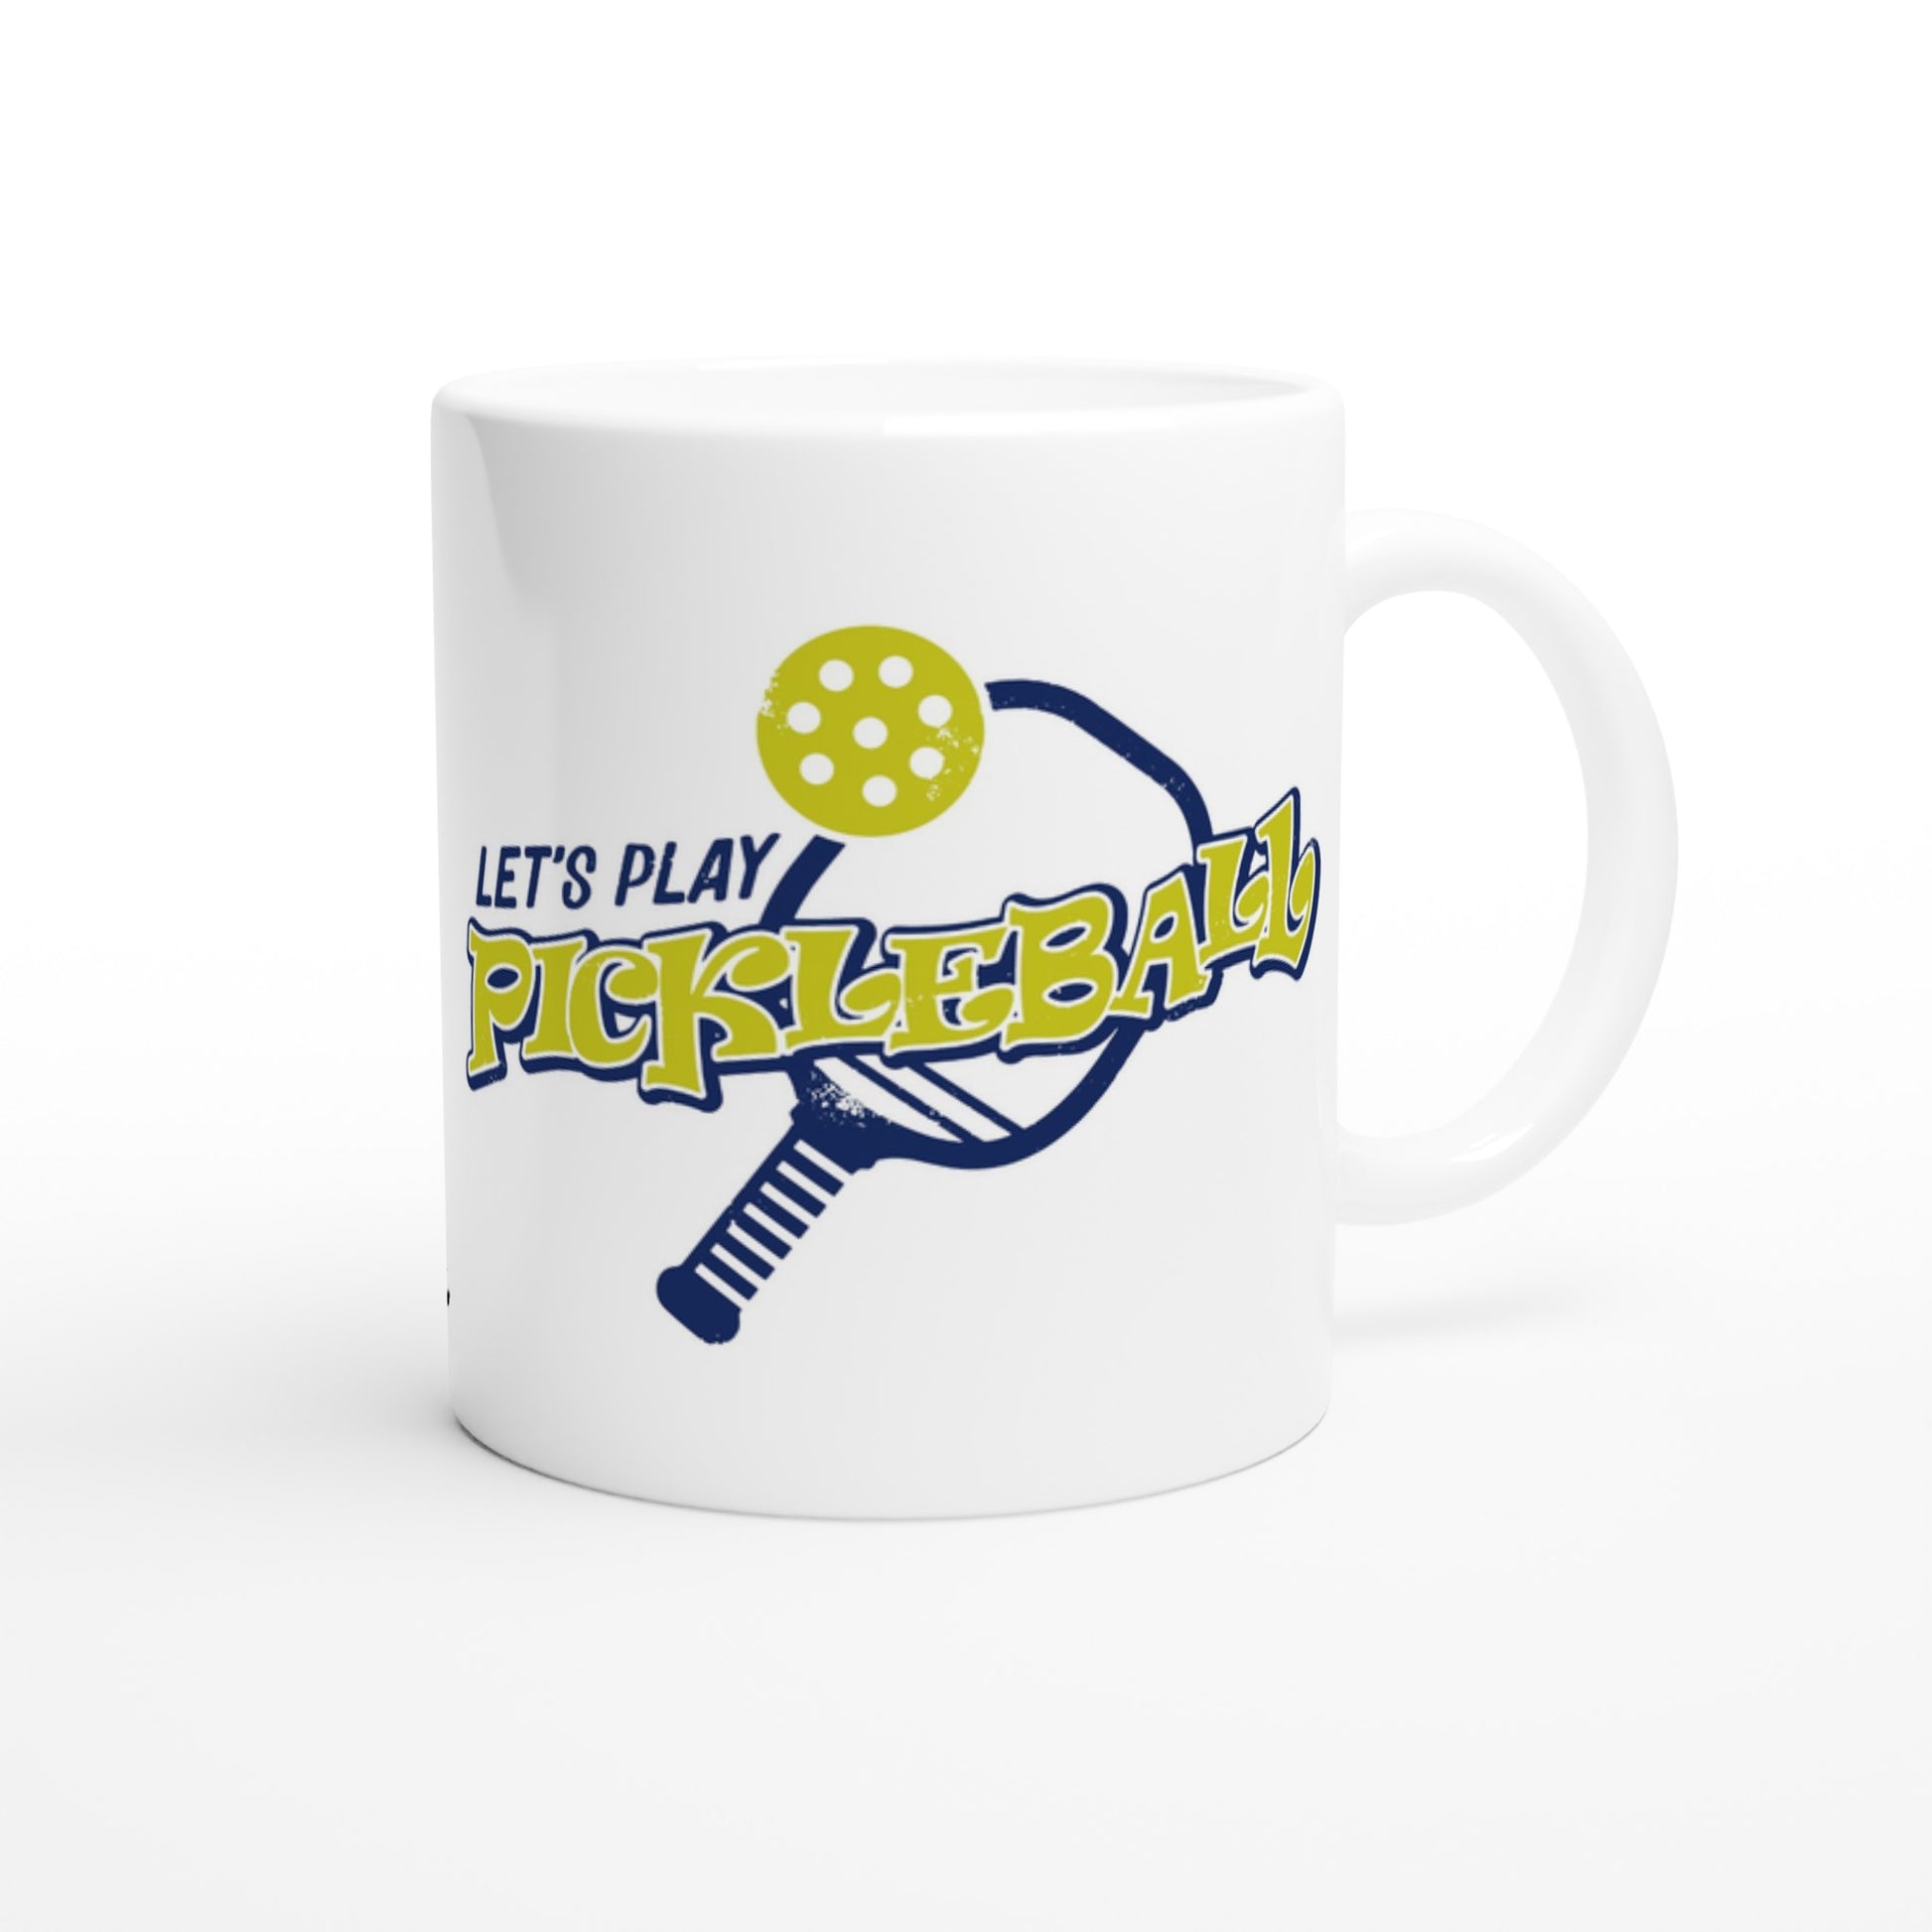 White ceramic 11oz mug with original motto Top 5 Pickleball Shopping list lettuce, Shake-n-bake, Nutmeg, Pickle, a Fly Swatter Don’t go in the kitchen front side and Let's Play PickleBall logo on back coffee mug dishwasher and microwave safe from WhatYa Say Apparel back view.